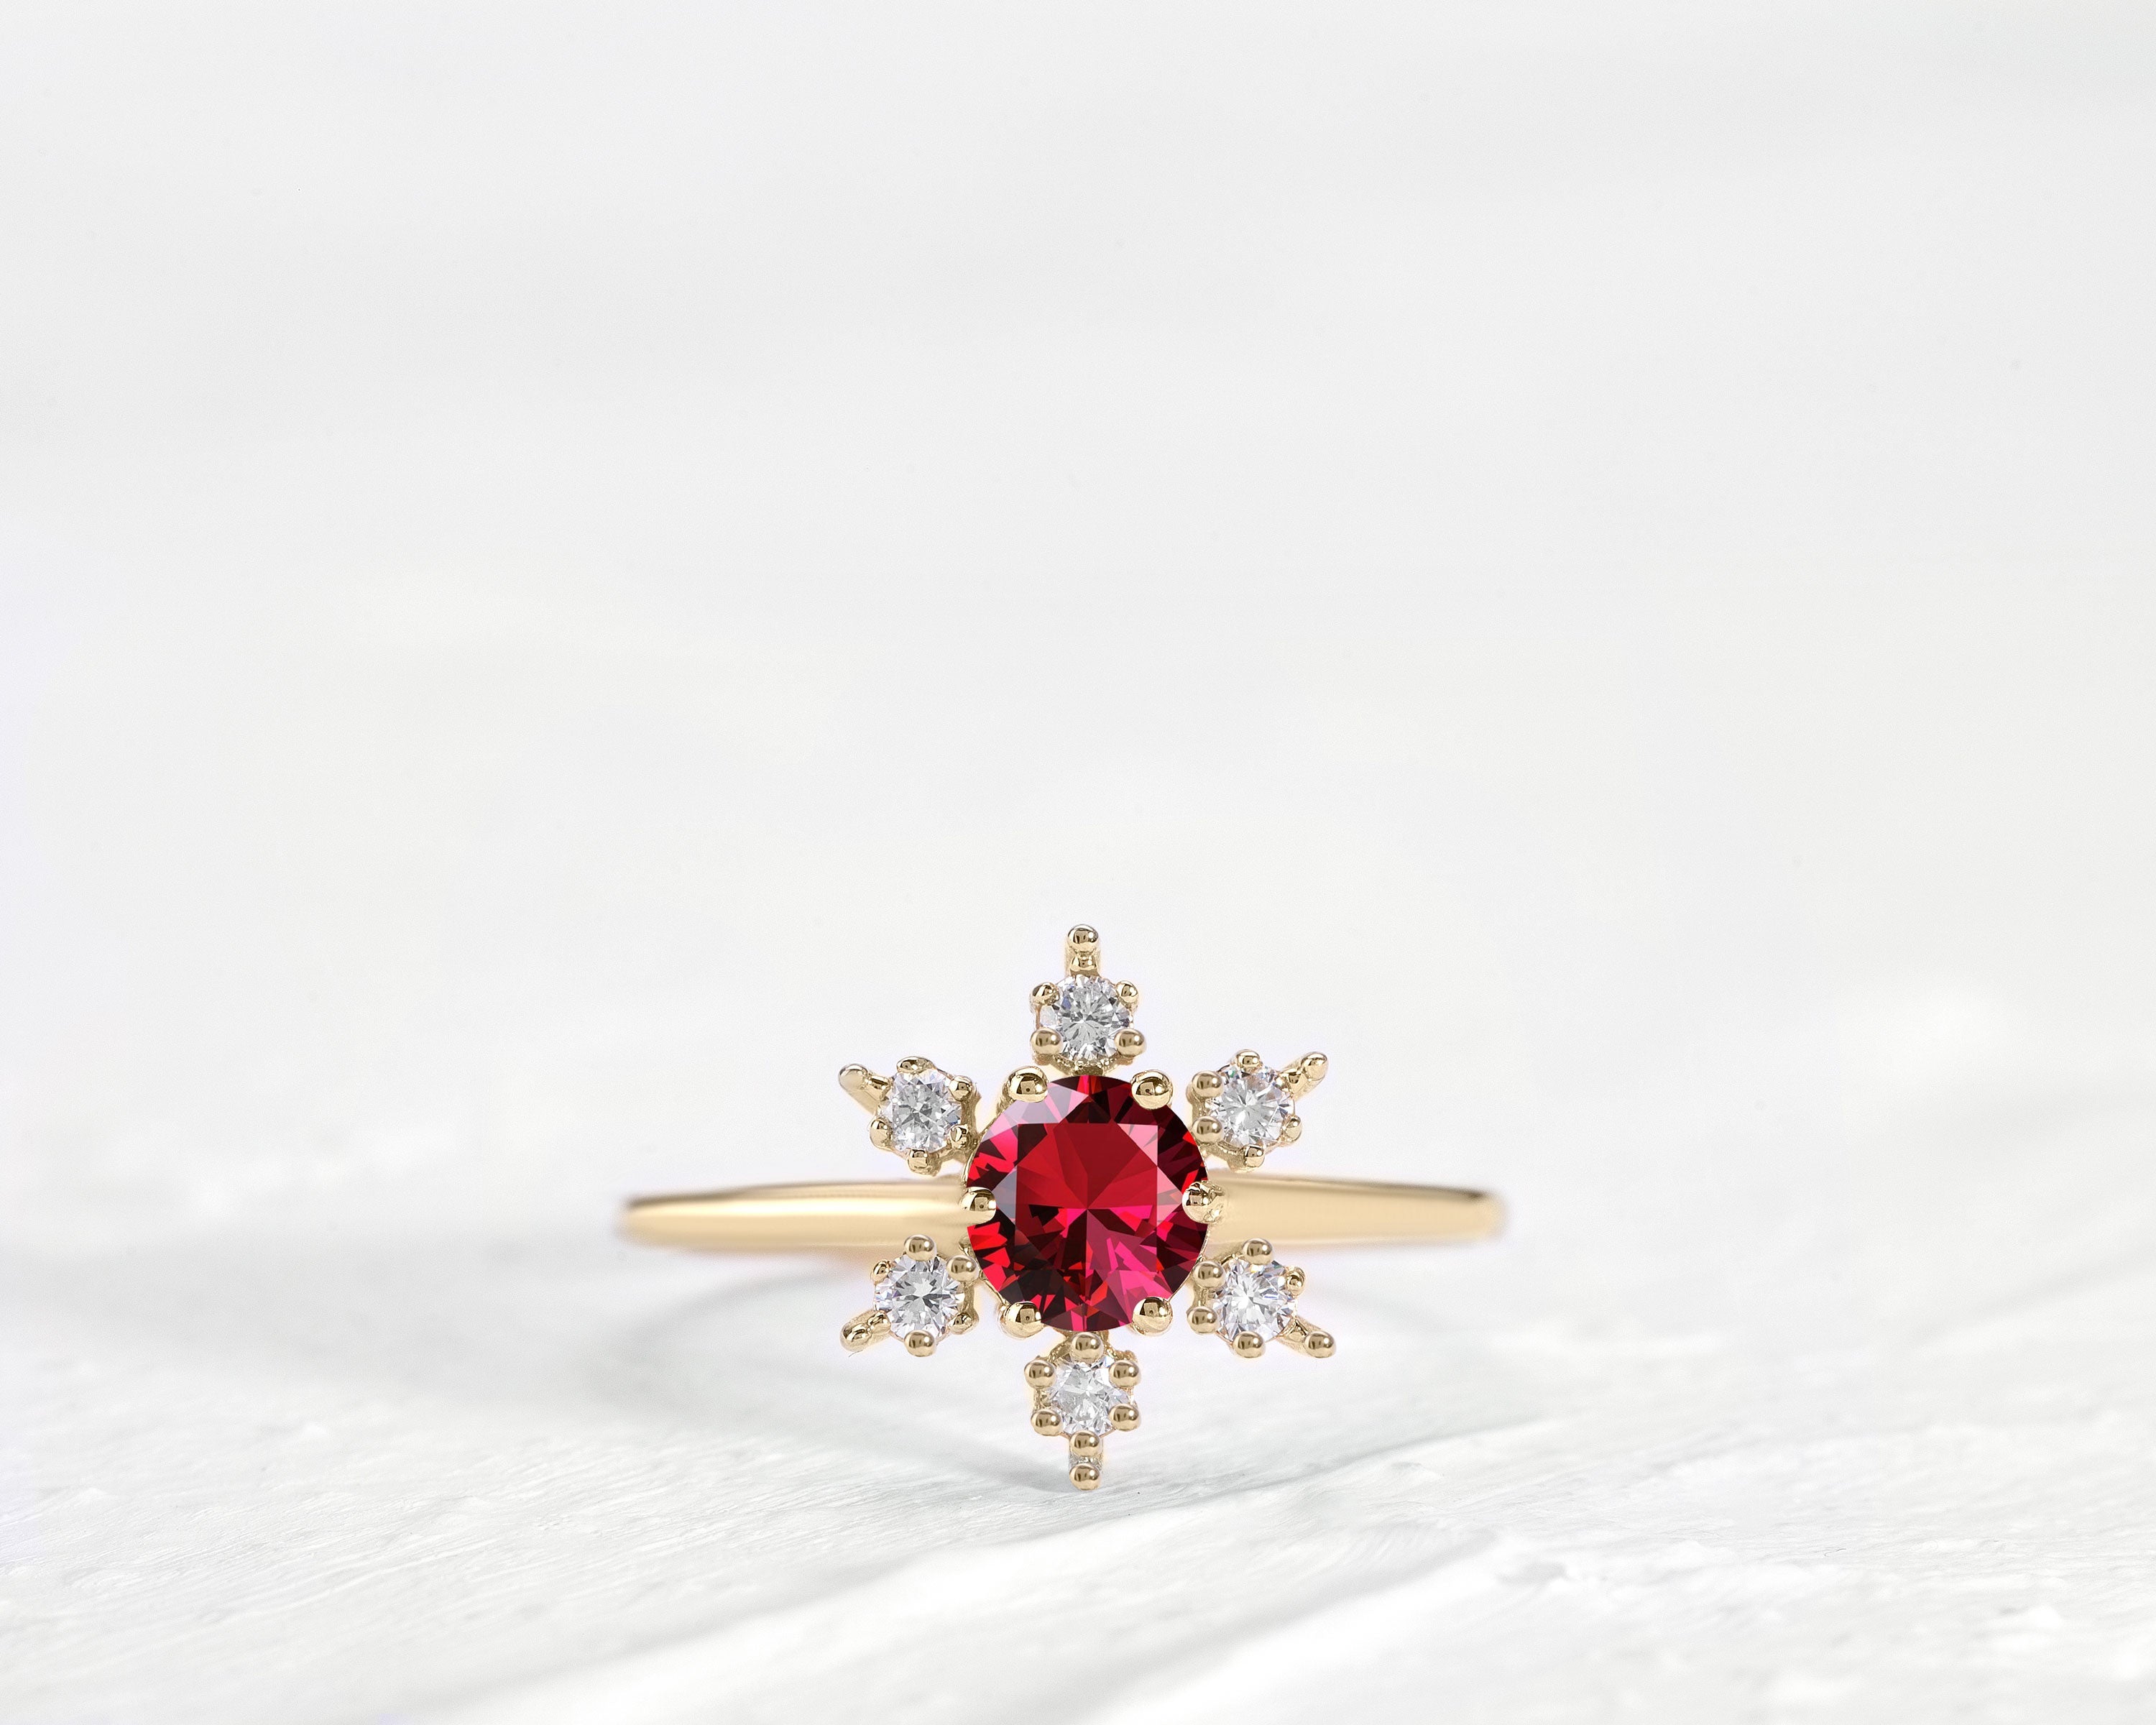 Straight Shank Snow Flake Ring, Rose Cut Ruby with Diamond